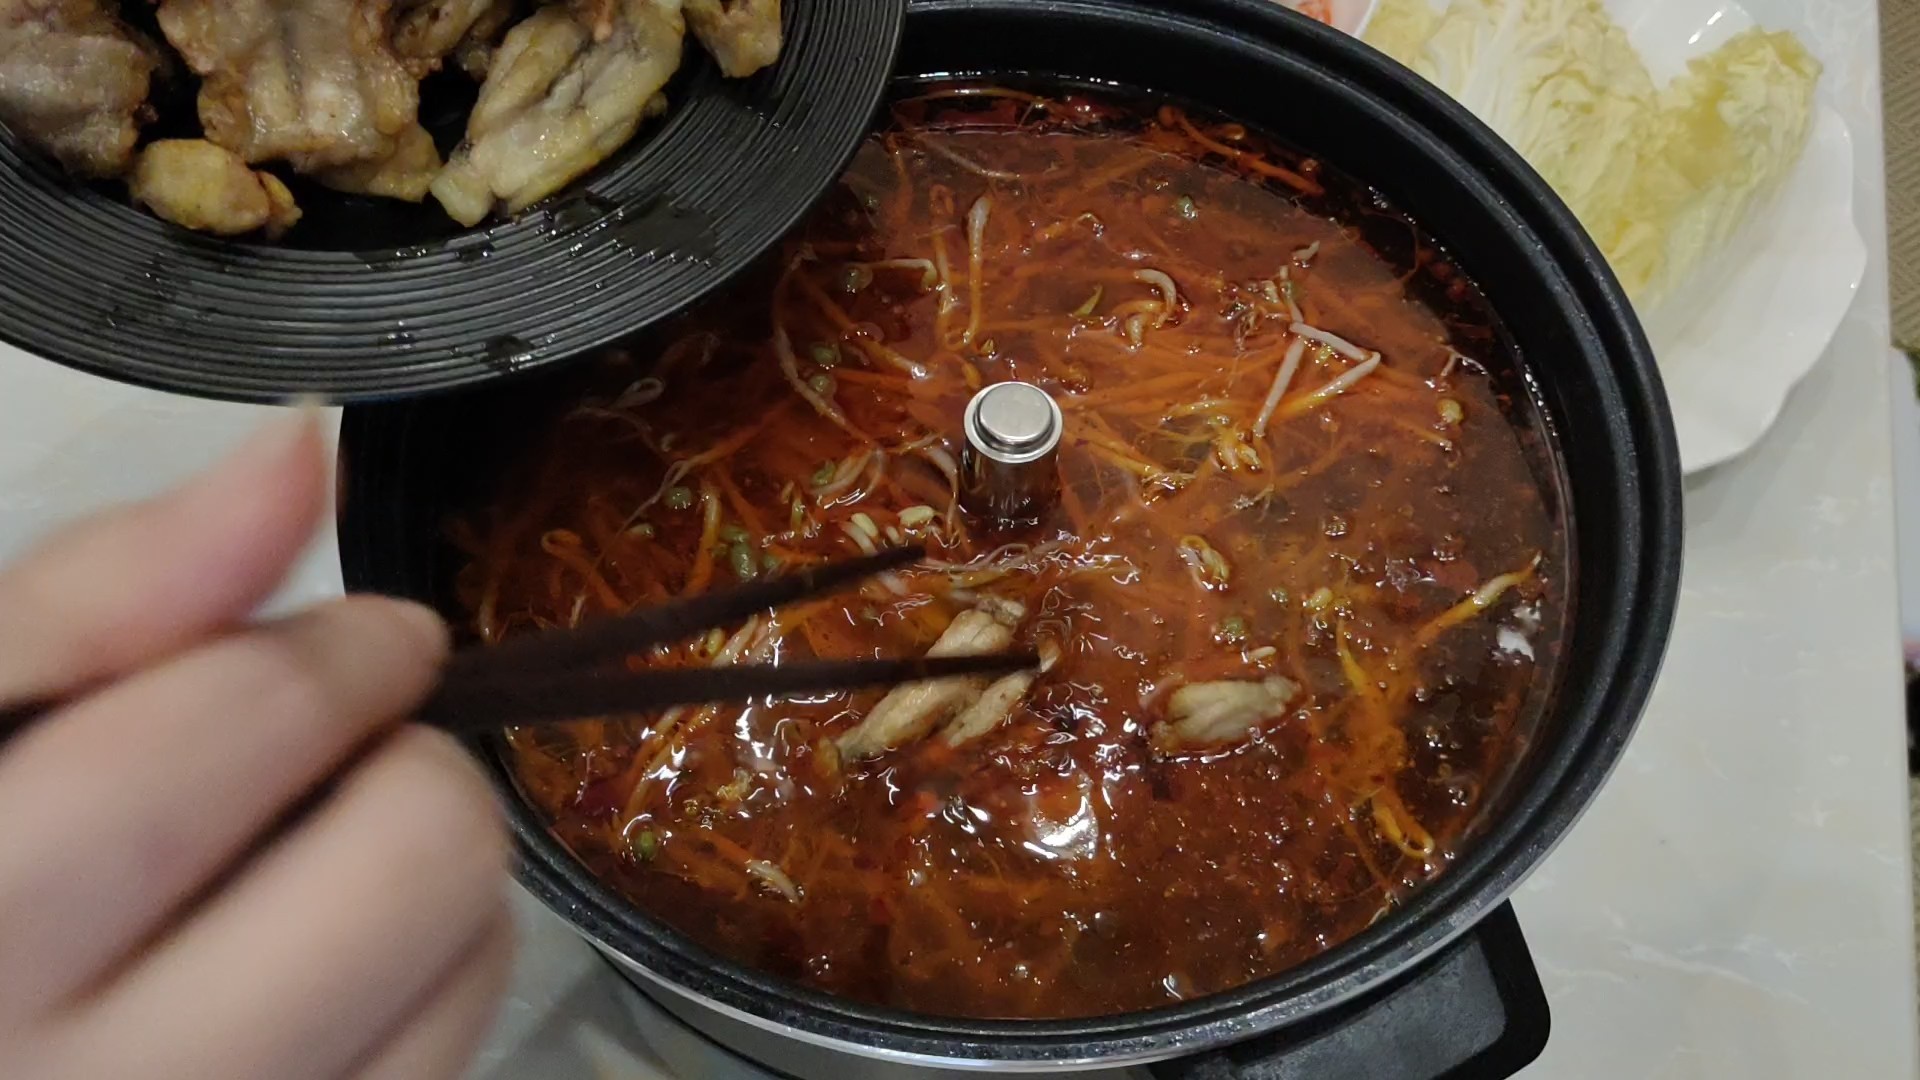 Spicy and Spicy Bullfrog Hot Pot recipe